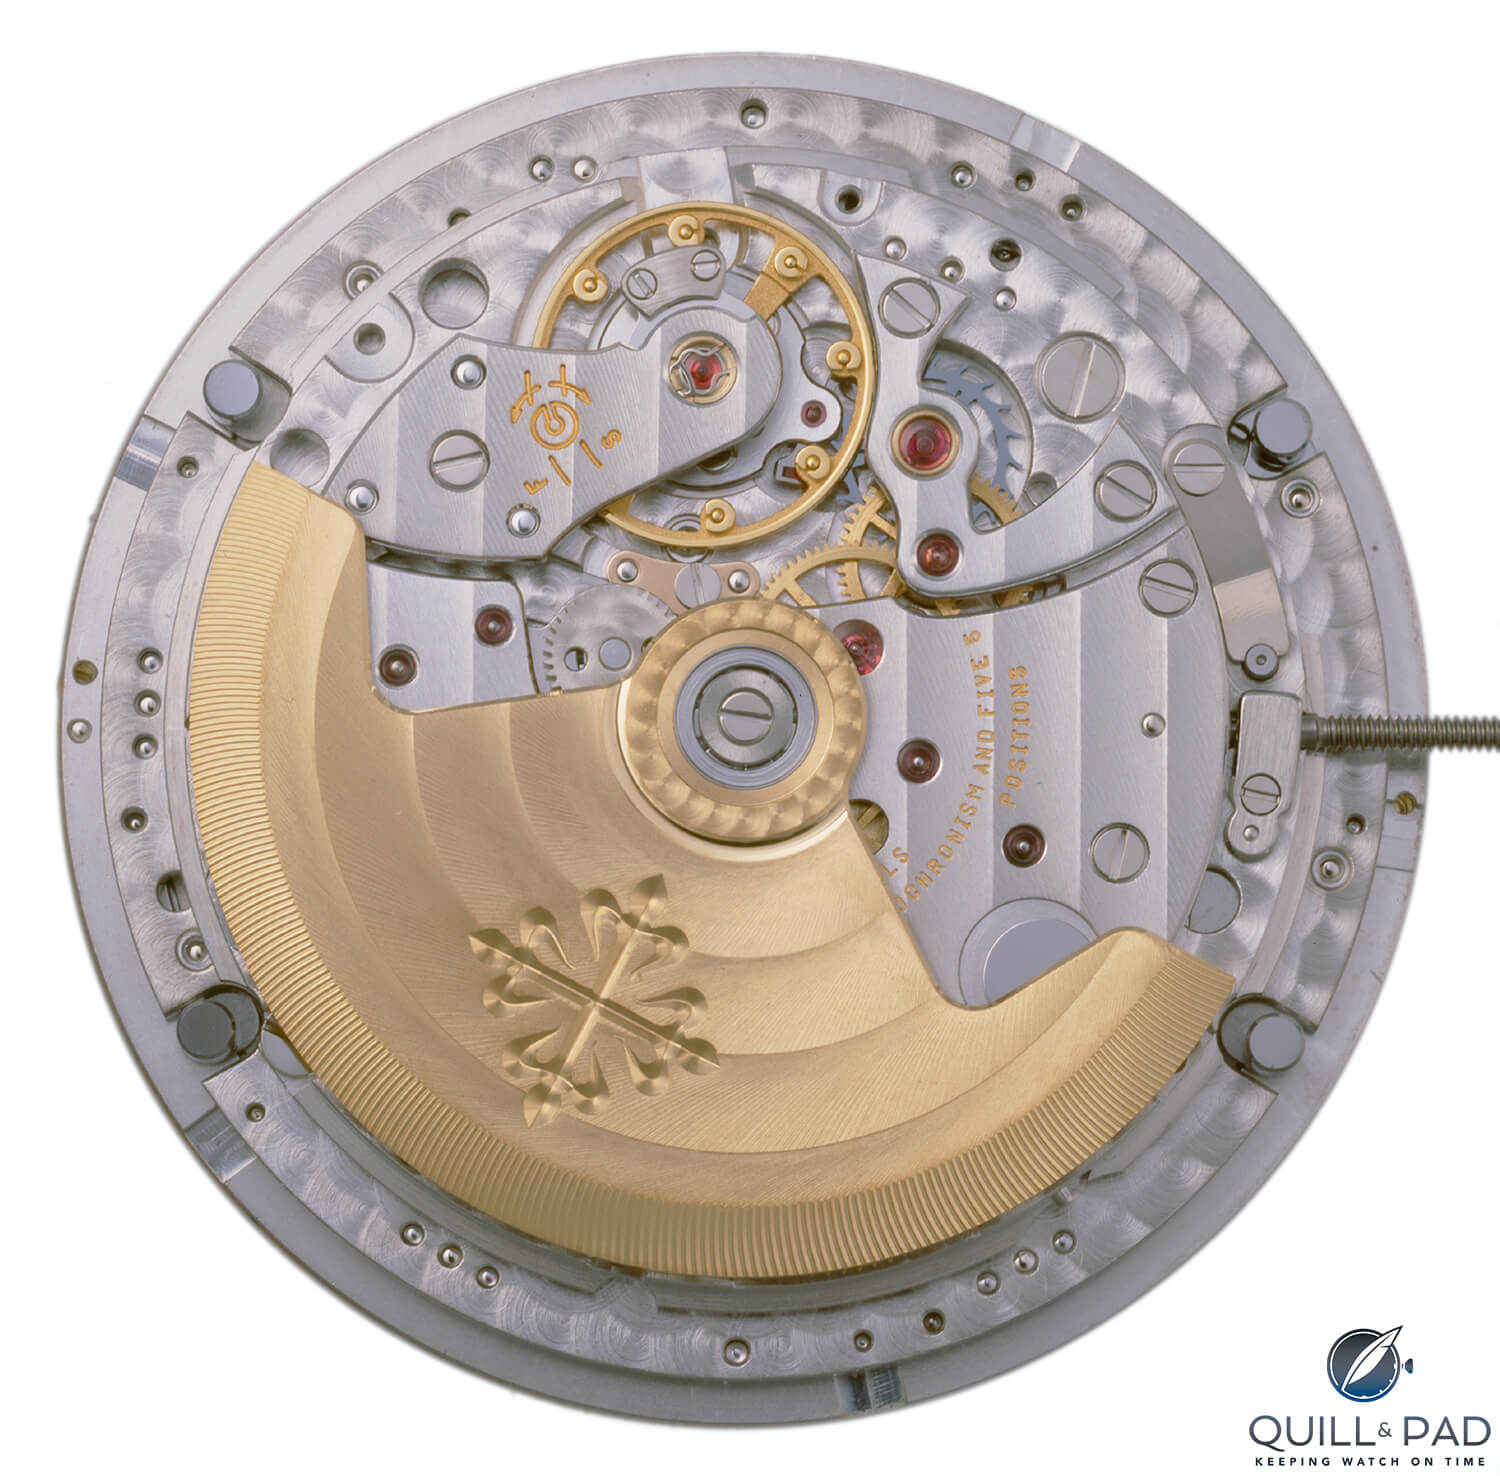 Patek Philippe Caliber 315 Advanced Research with Silinvar escape wheel